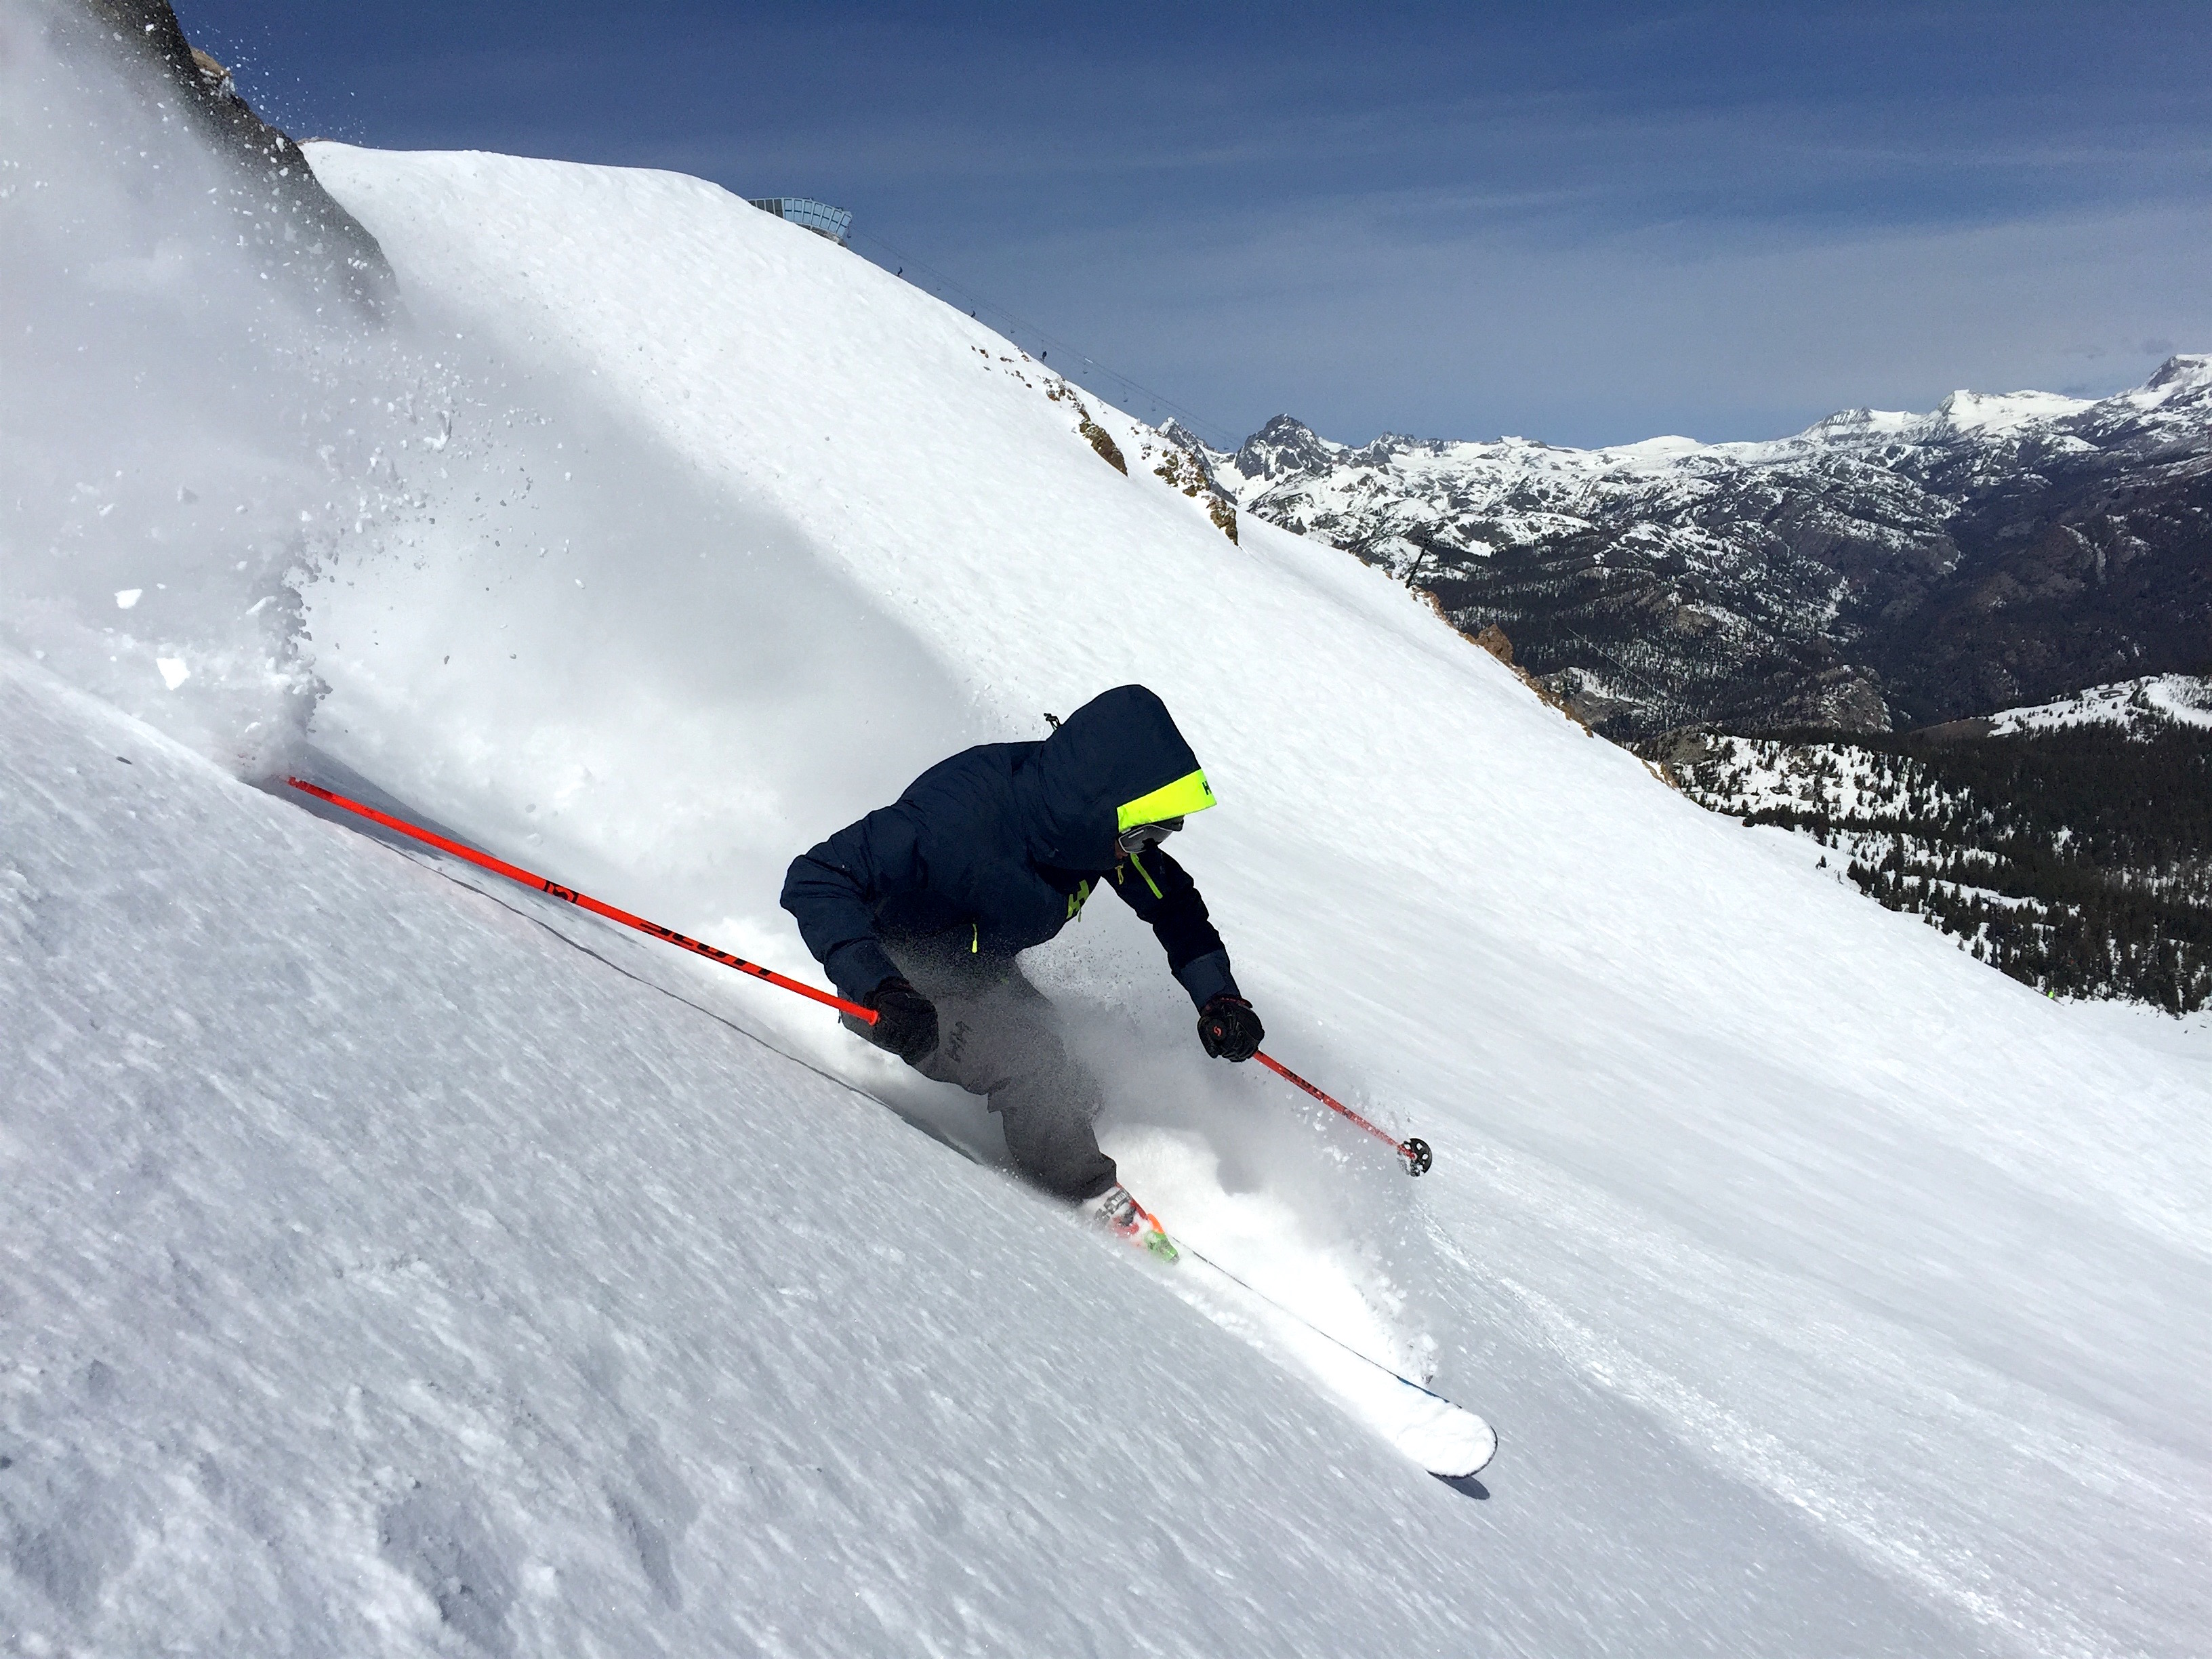 Miles in the perfect snow in lower Hangman's today. photo: snowbrains